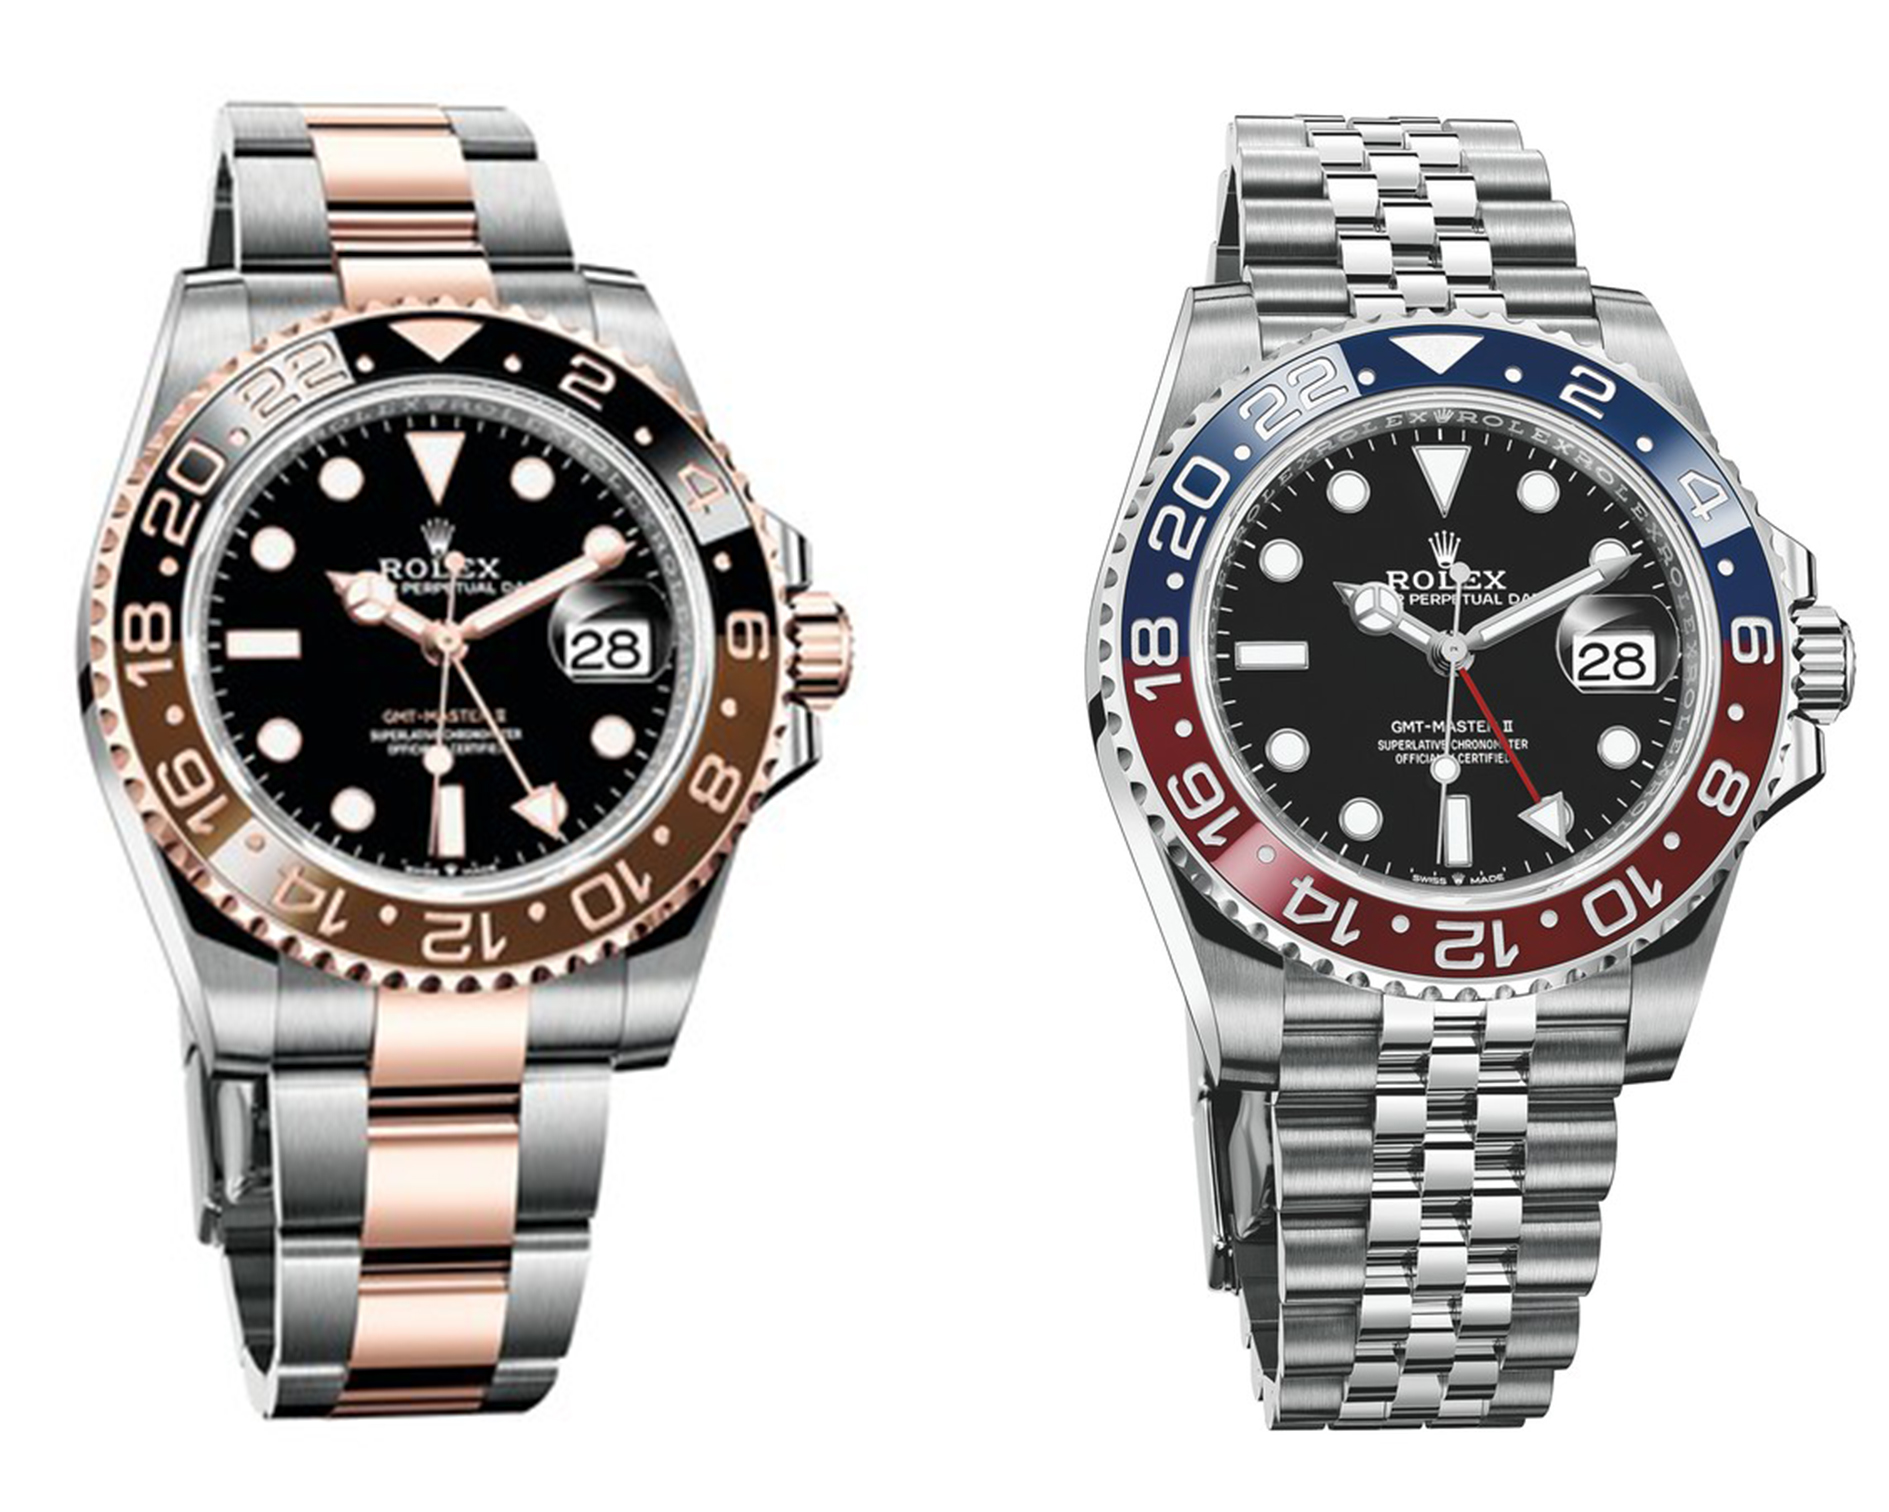 Rolex Hikes UK Prices By 7%